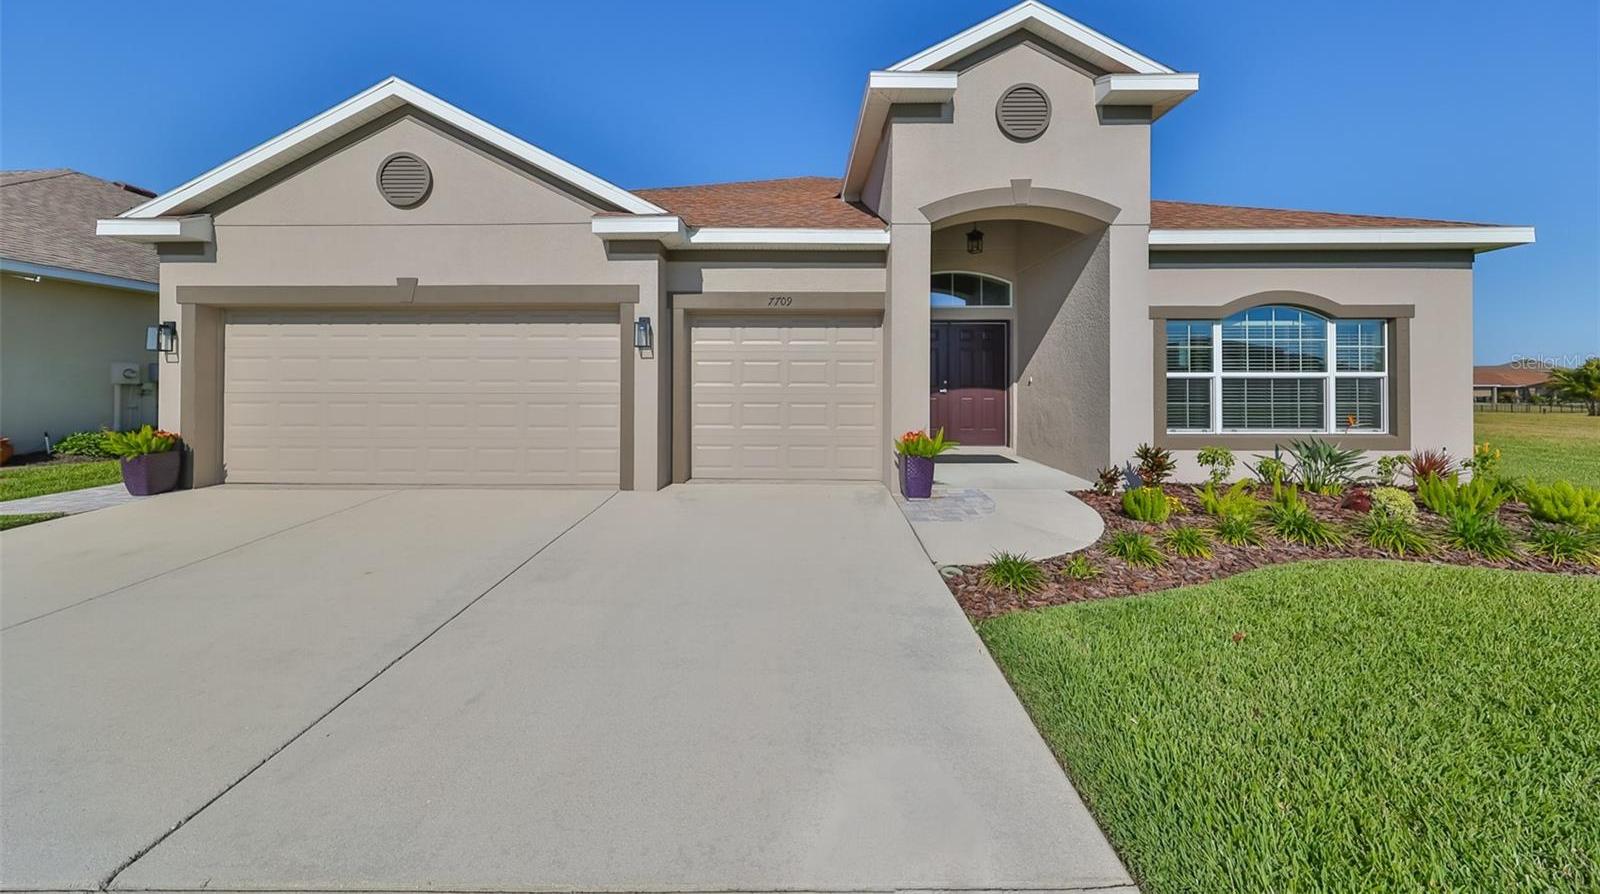 Photo one of 7709 112Th E Ave Parrish FL 34219 | MLS T3522162